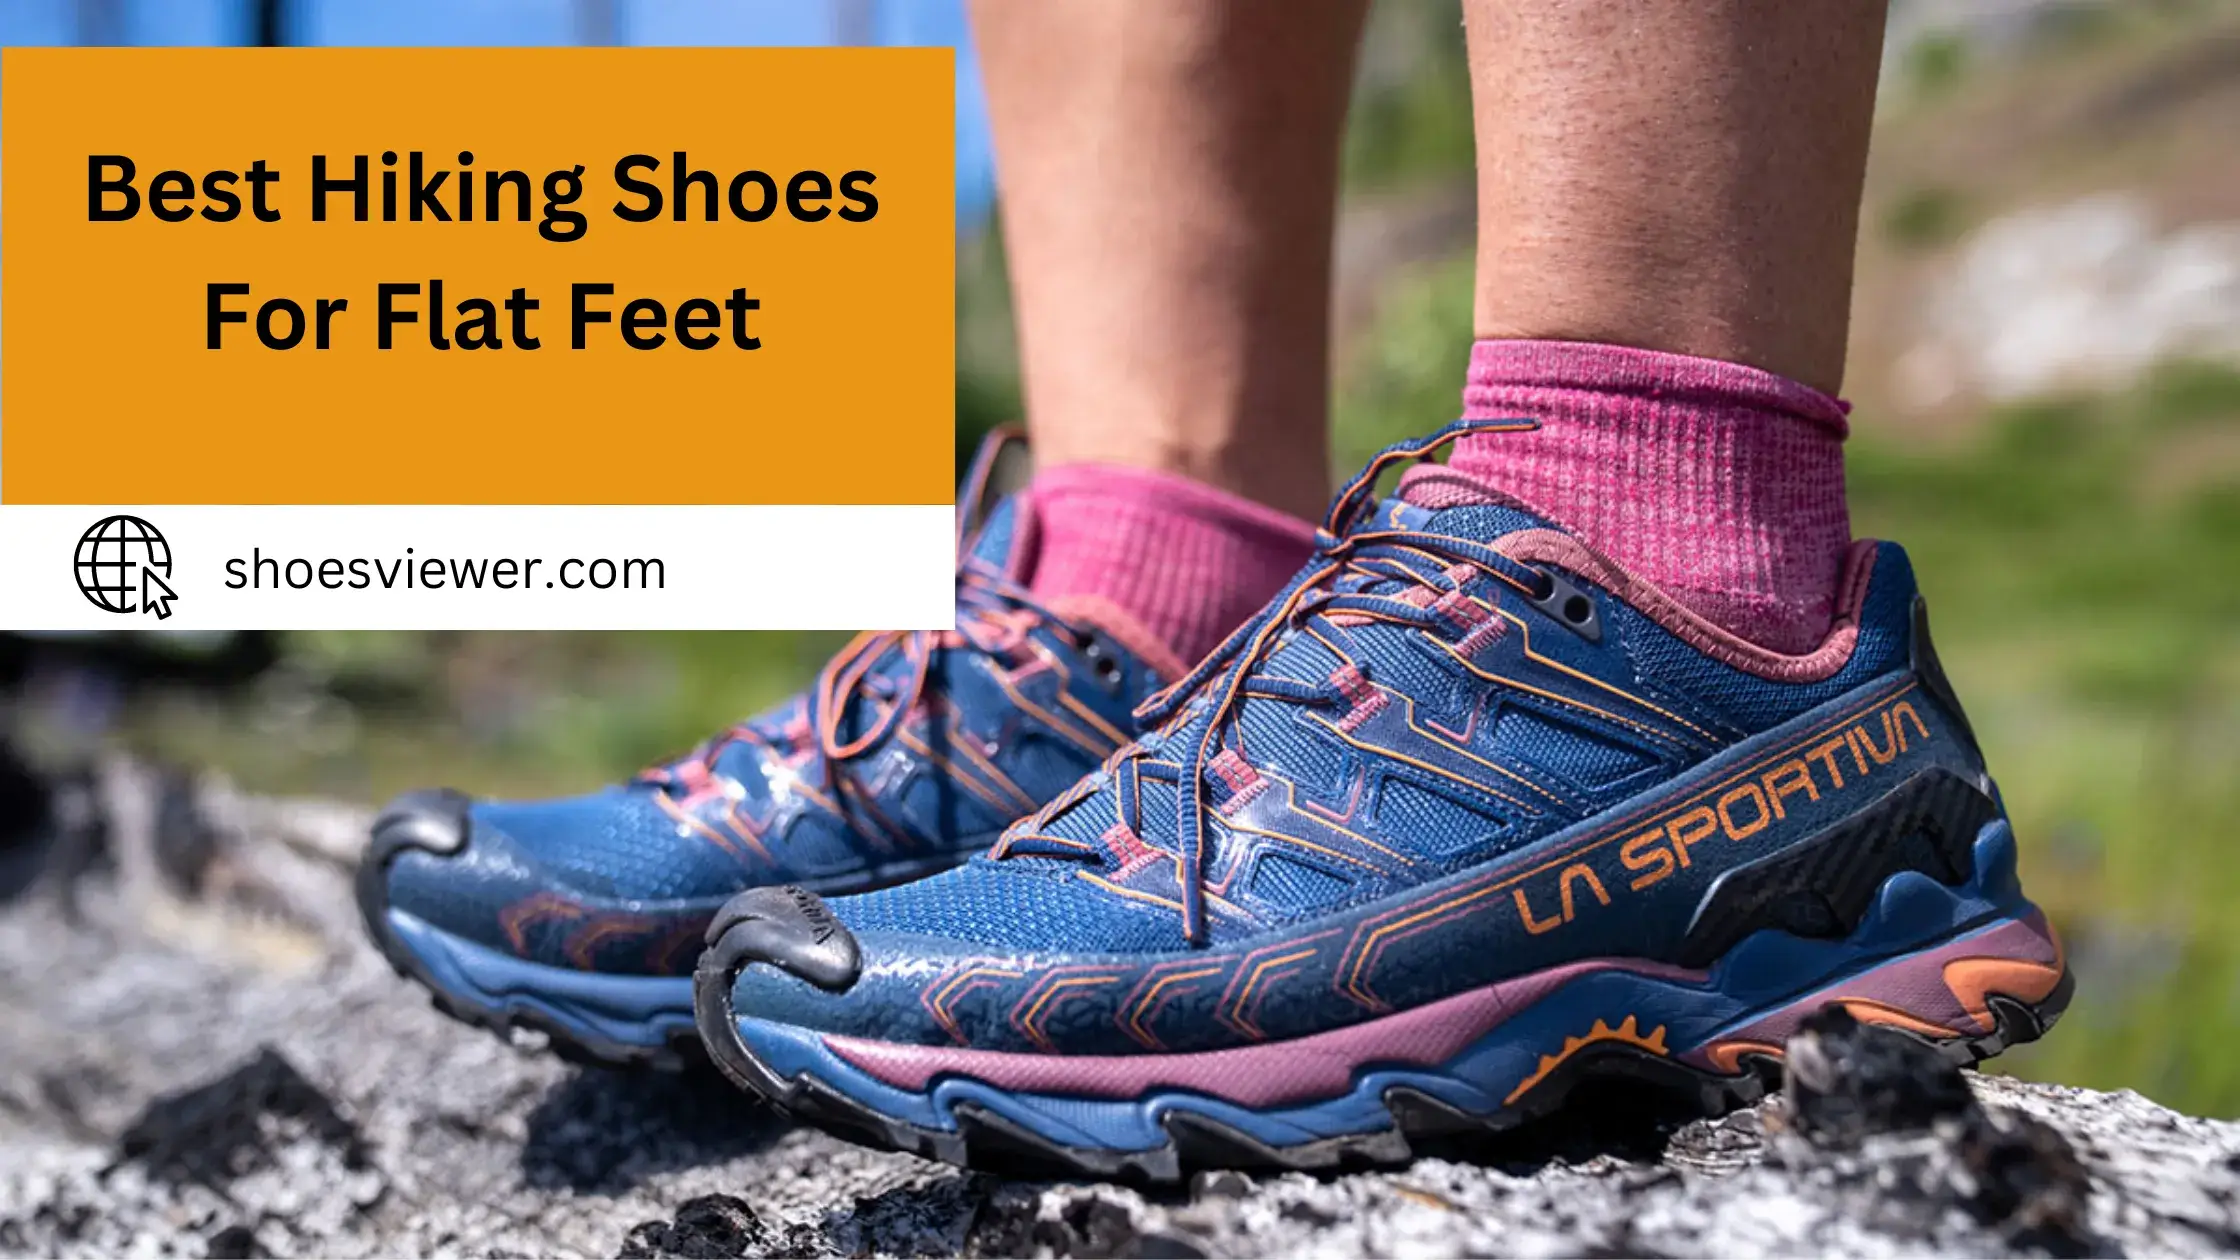 Unbiased Reviews of Top 10 Best Hiking Shoes For Flat Feet